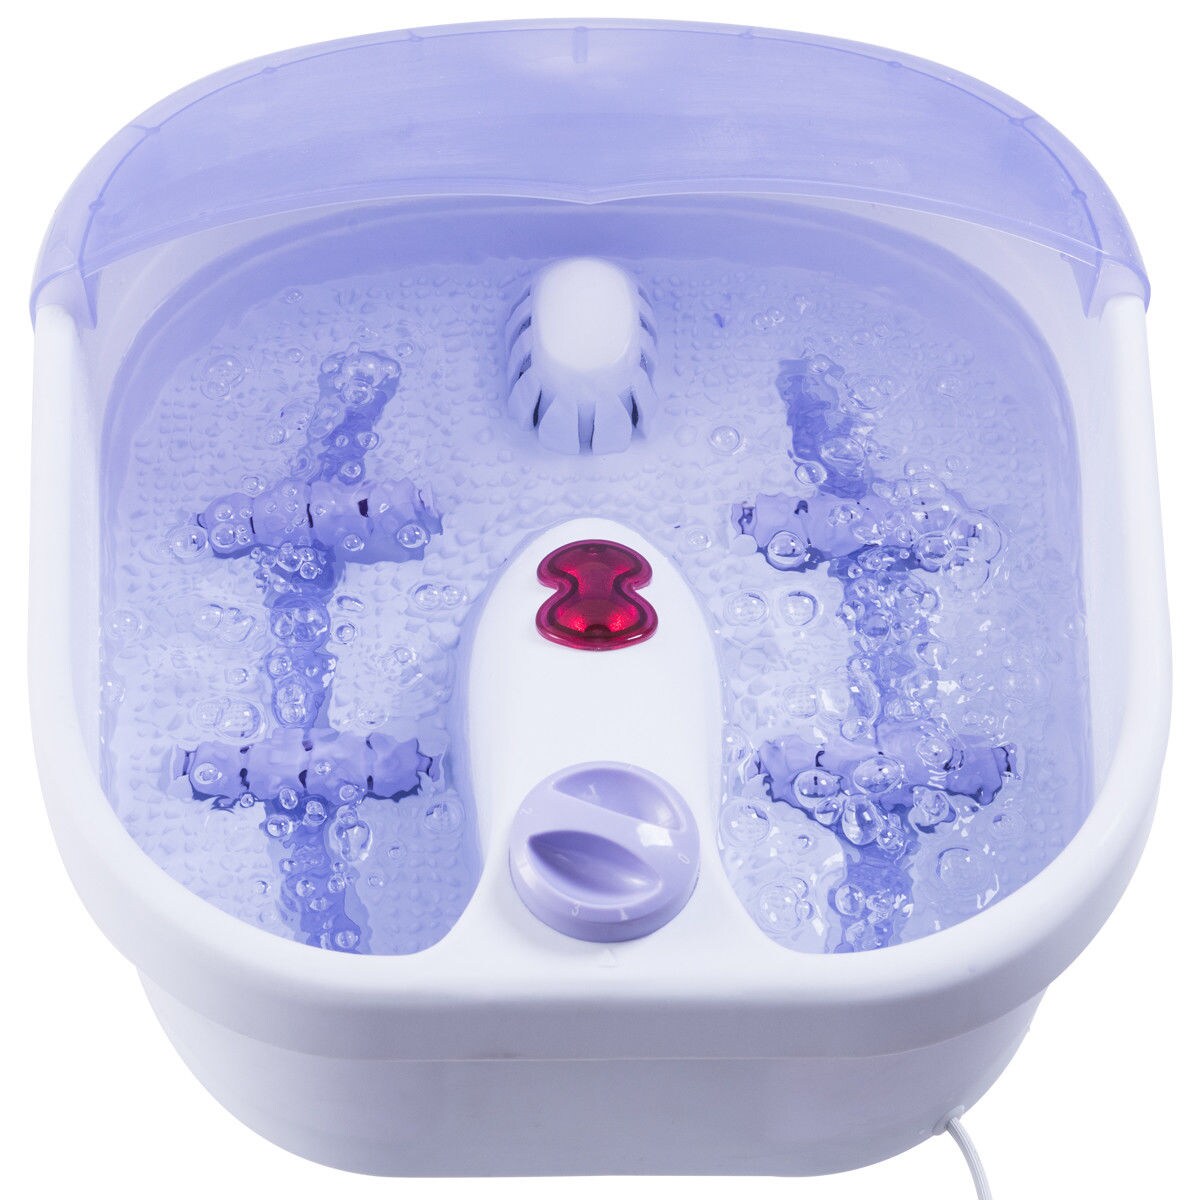 Costway Electrical Foot Tub Basin Point Massage Home Use Therapy Machine Health Spa